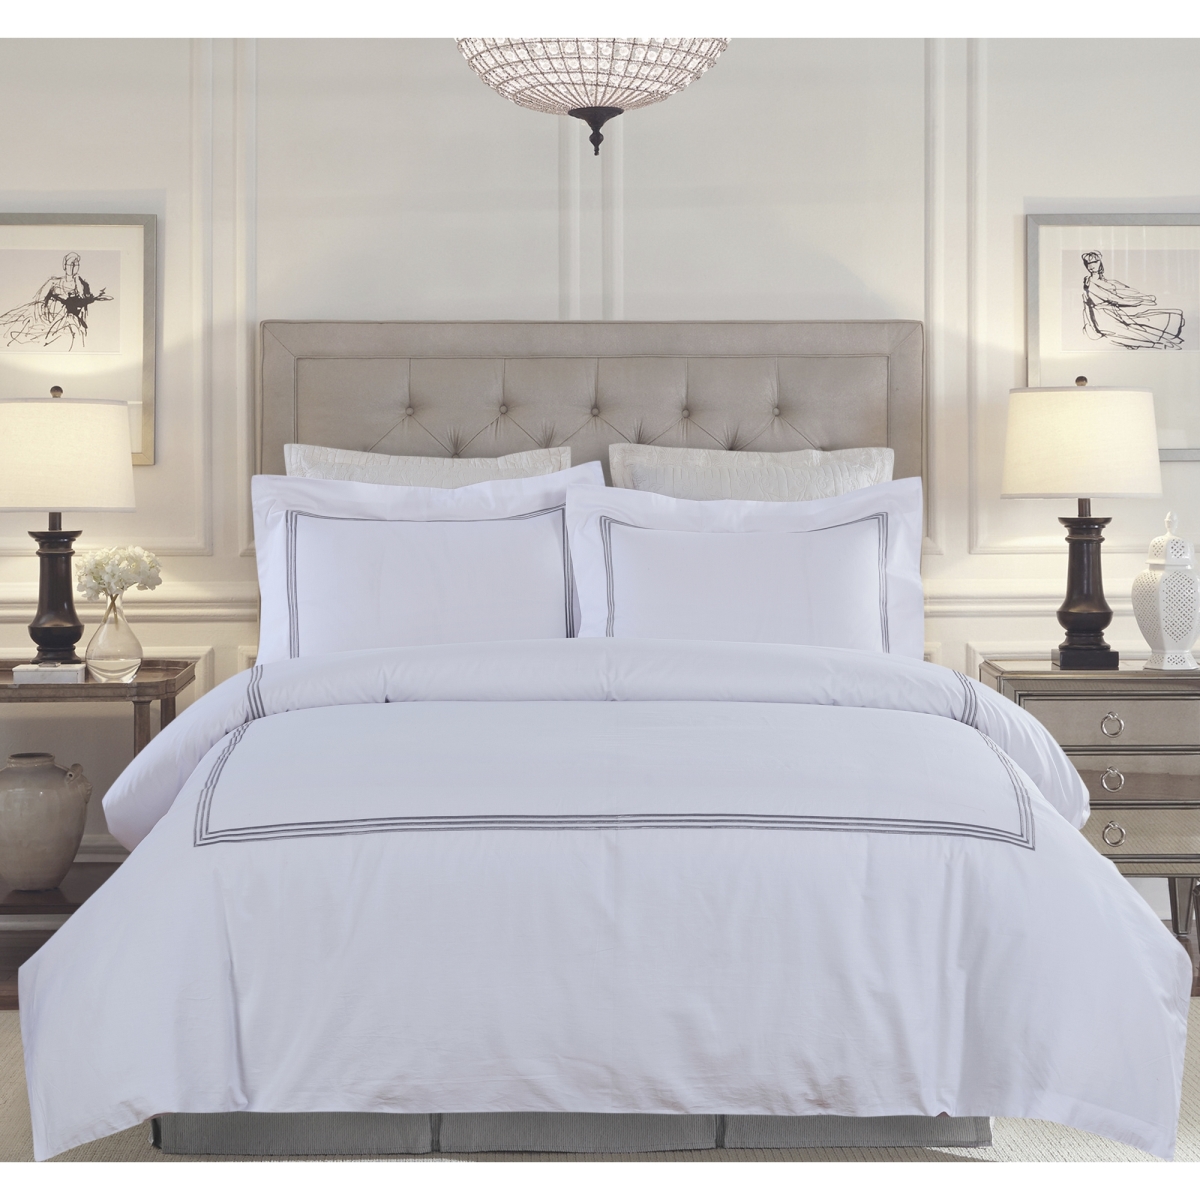 Whtx606-svk Silver Line Embroidery On White 300 Thread Count Cotton Sateen Duvet Set - King Size - 3 Piece